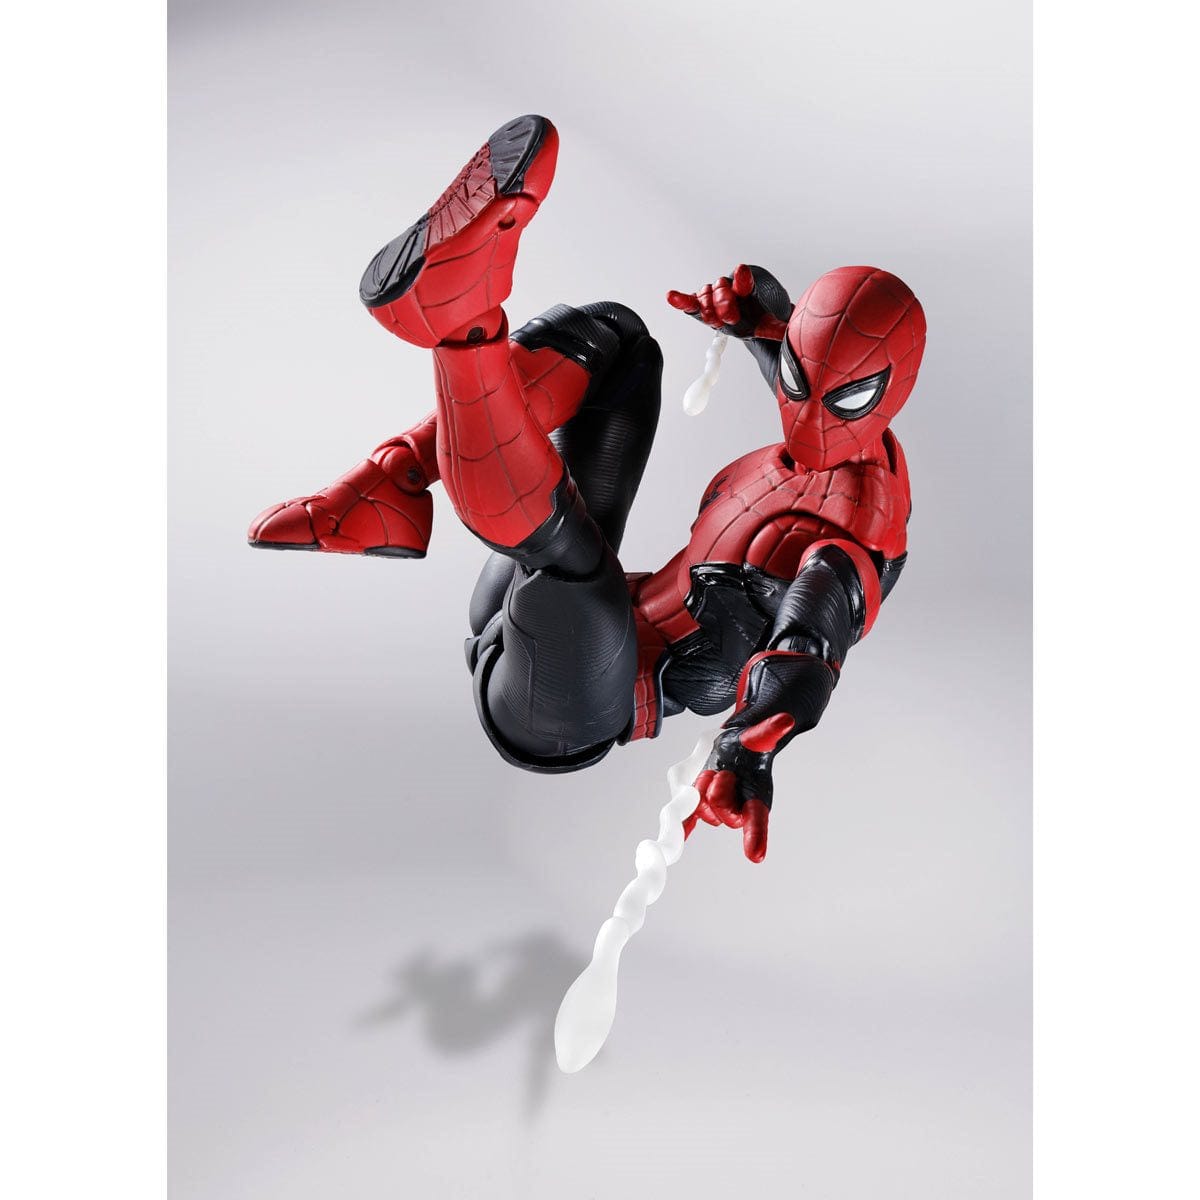 Spider-Man: No Way Home Spider-Man Upgraded Suit S.H.Figuarts Action Figure Media 6 of 8  S.H.Figuarts Spider-Man Upgrade Suit (Spider-Man) toys  for kids and collectors